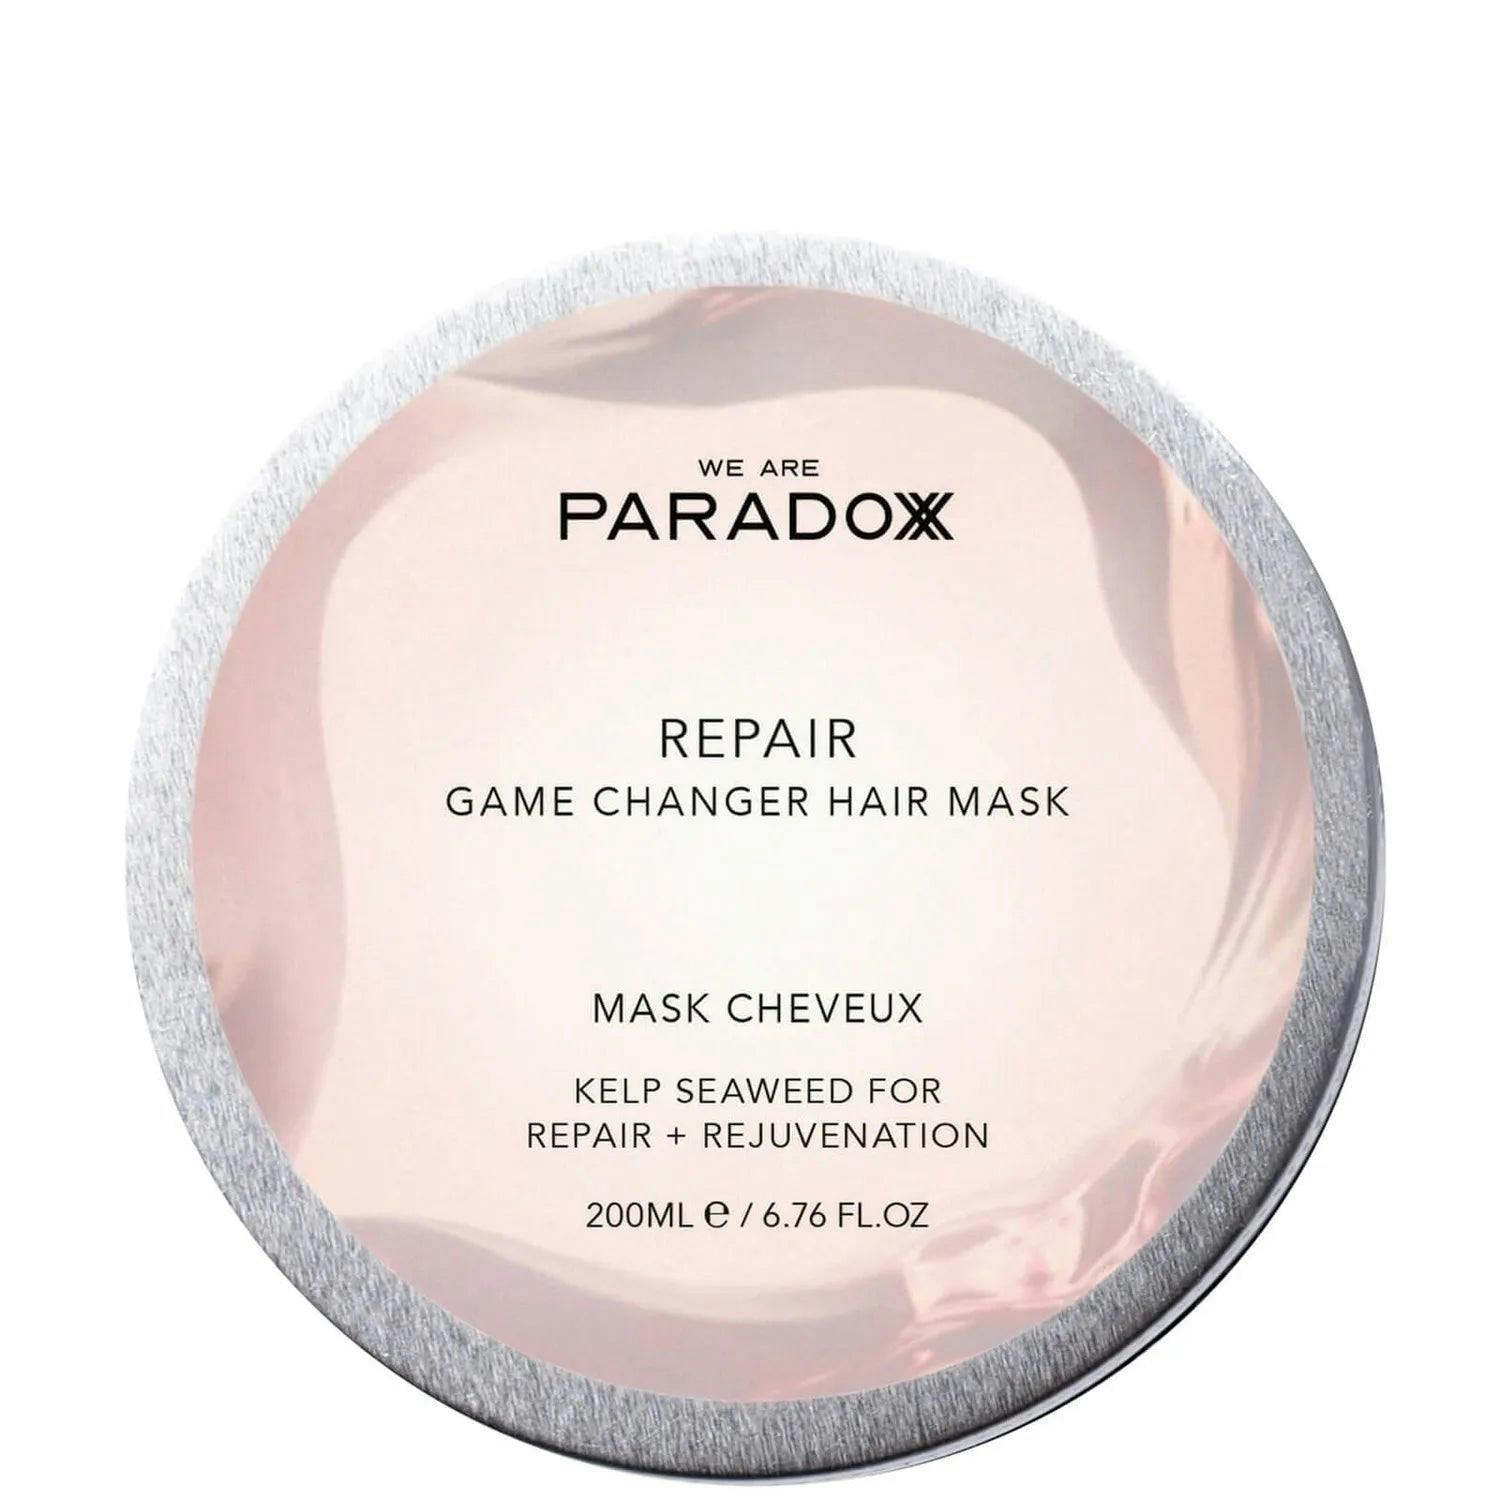 We are Paradoxx Game Changer Hair Mask We are Paradoxx Game Changer Hair Mask 1